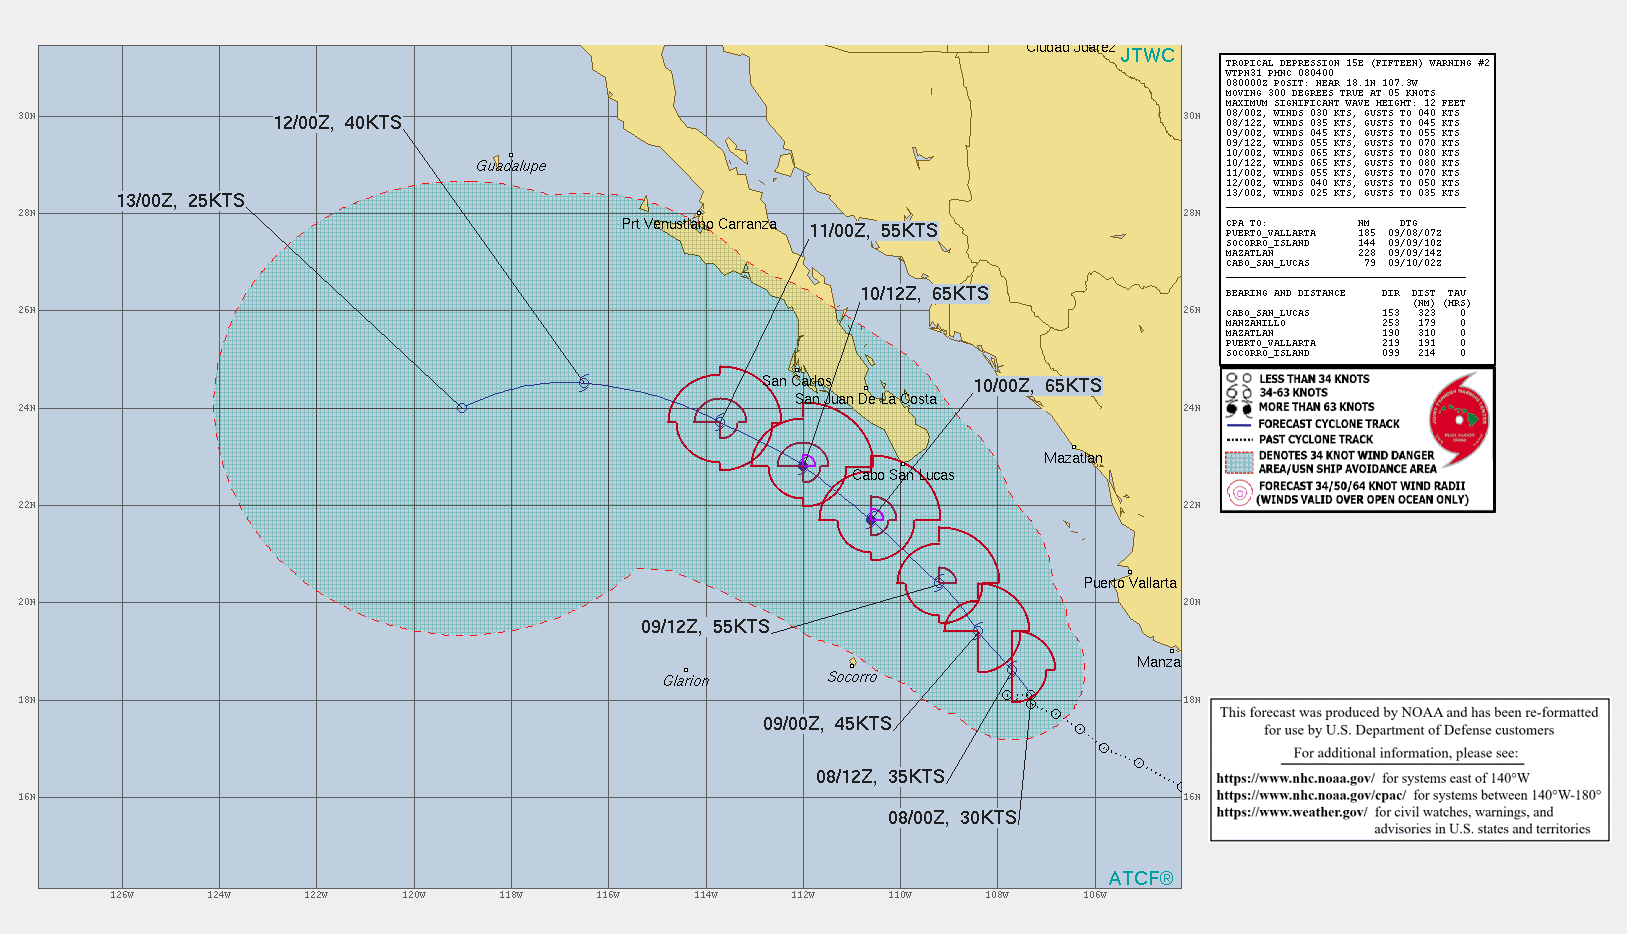 EASTERN PACIFIC. TD 15E. WARNING 2 ISSUED AT 08/04UTC. CURRENT INTENSITY IS 30KNOTS AND IS FORECAST TO PEAK AT 65KNOTS/CAT 1 BY 10/00UTC.